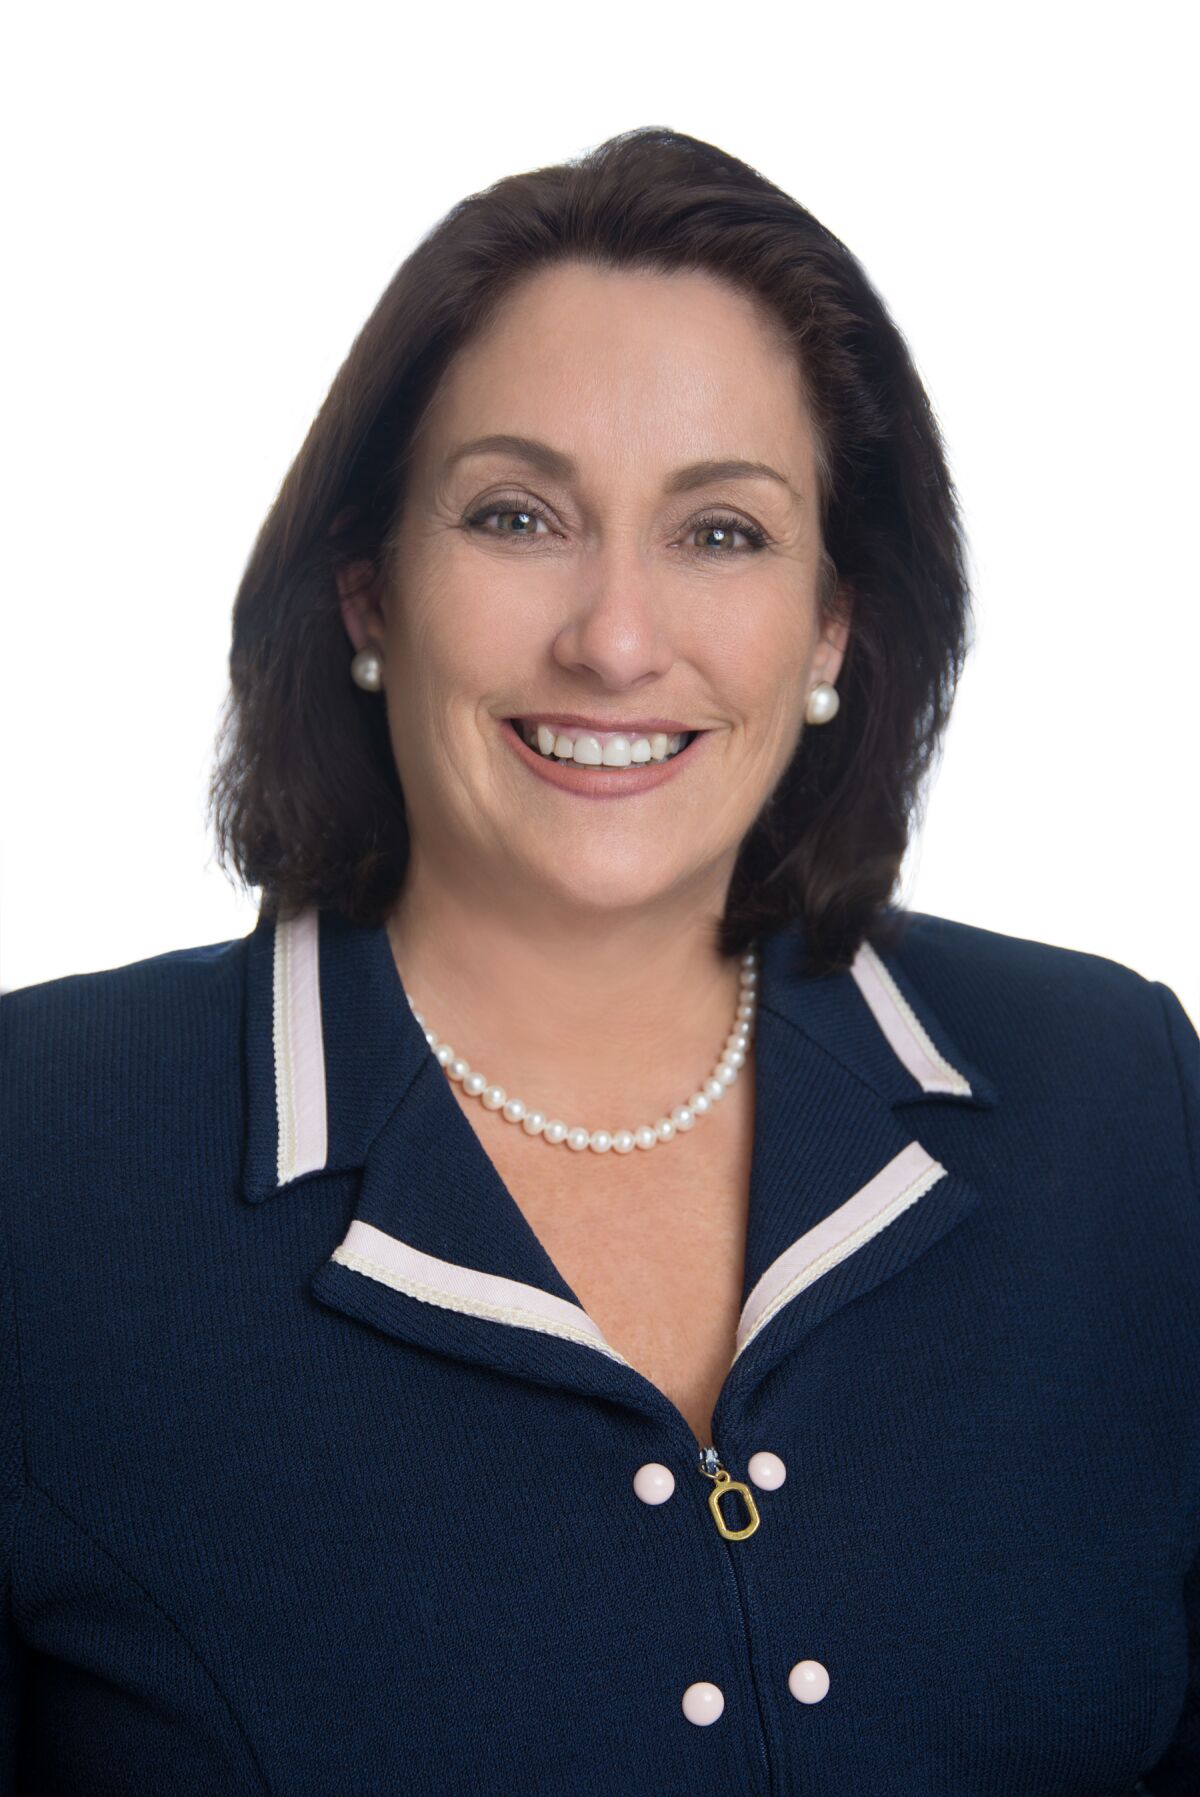 Debra Rosen, president and CEO of the North San Diego Business Chamber